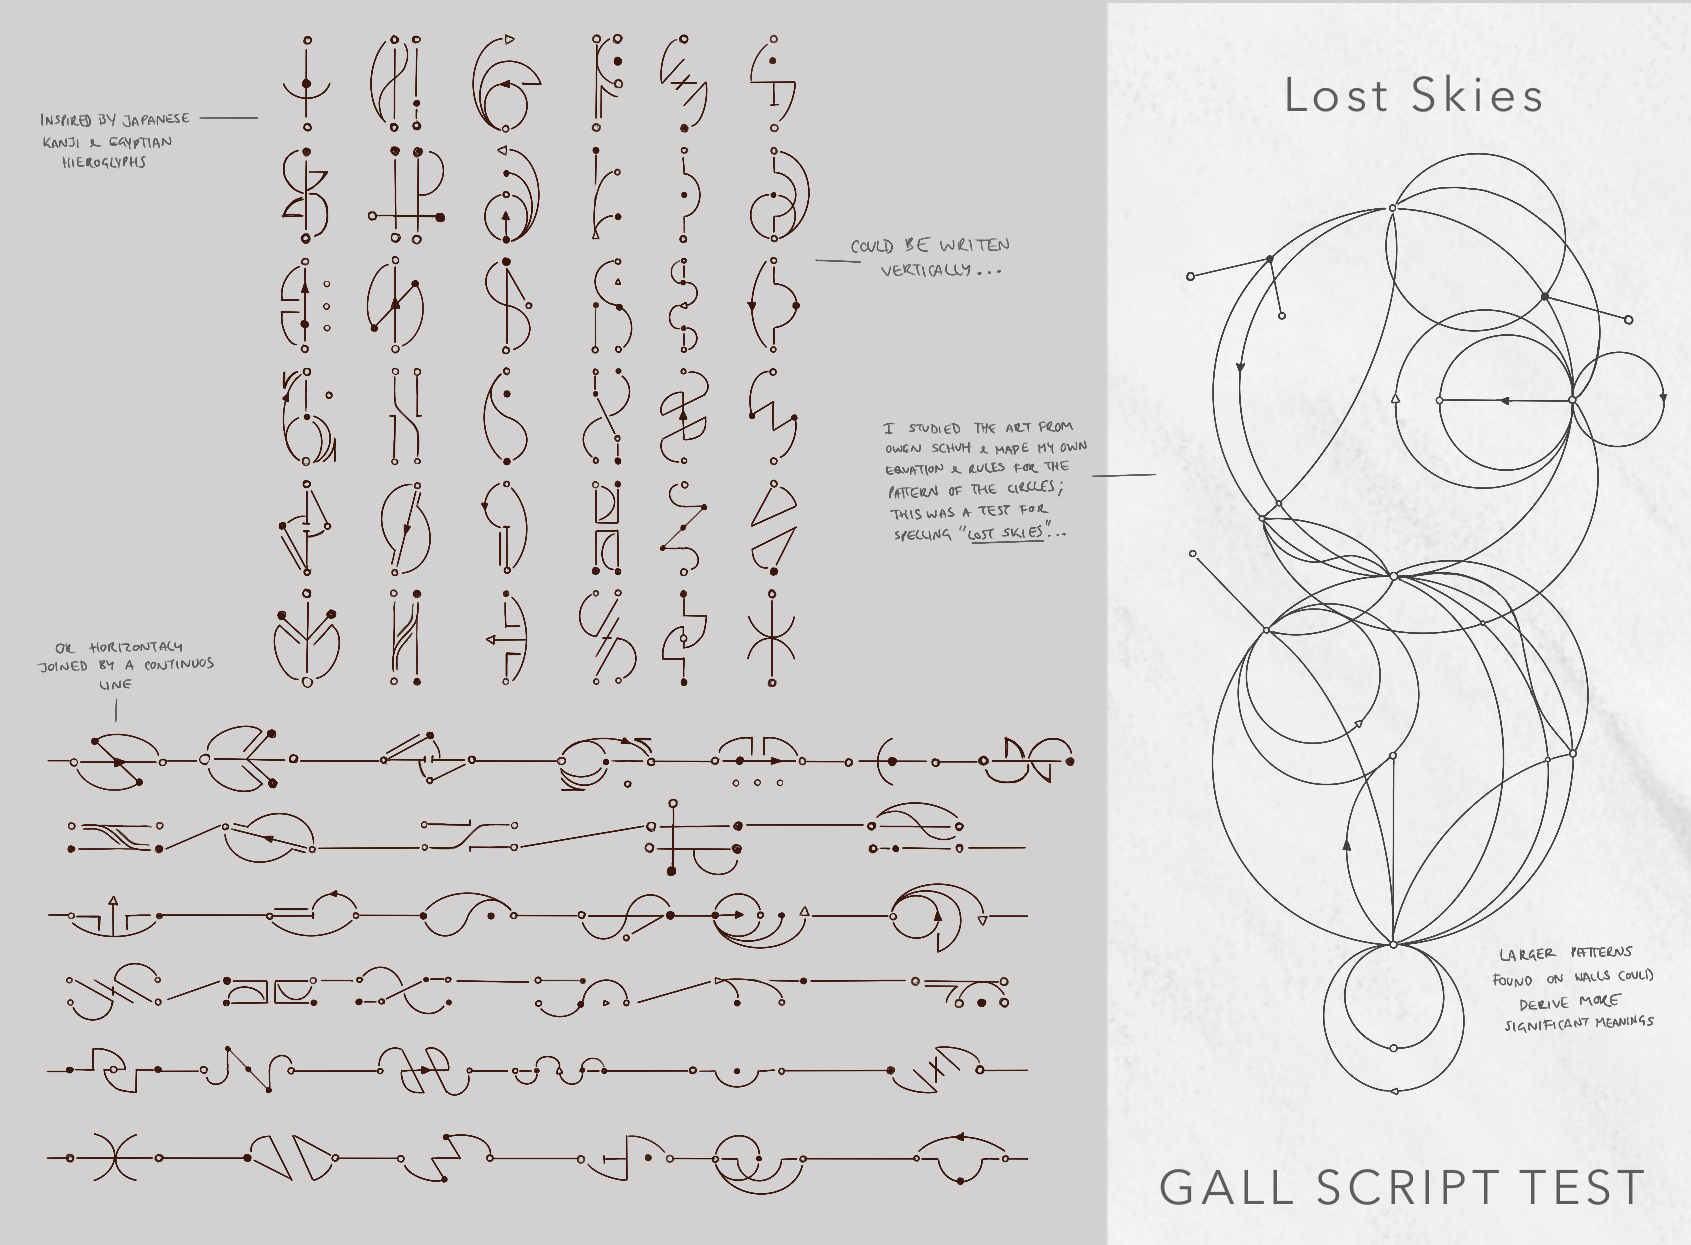 The image above shows some Gall Kanji style script on the left. That was just random shape exploration that could possibly be applied later. The large&nbsp;Lost Skies&nbsp;script shown on the right was made using the equation and rules.&nbsp;&nbsp;